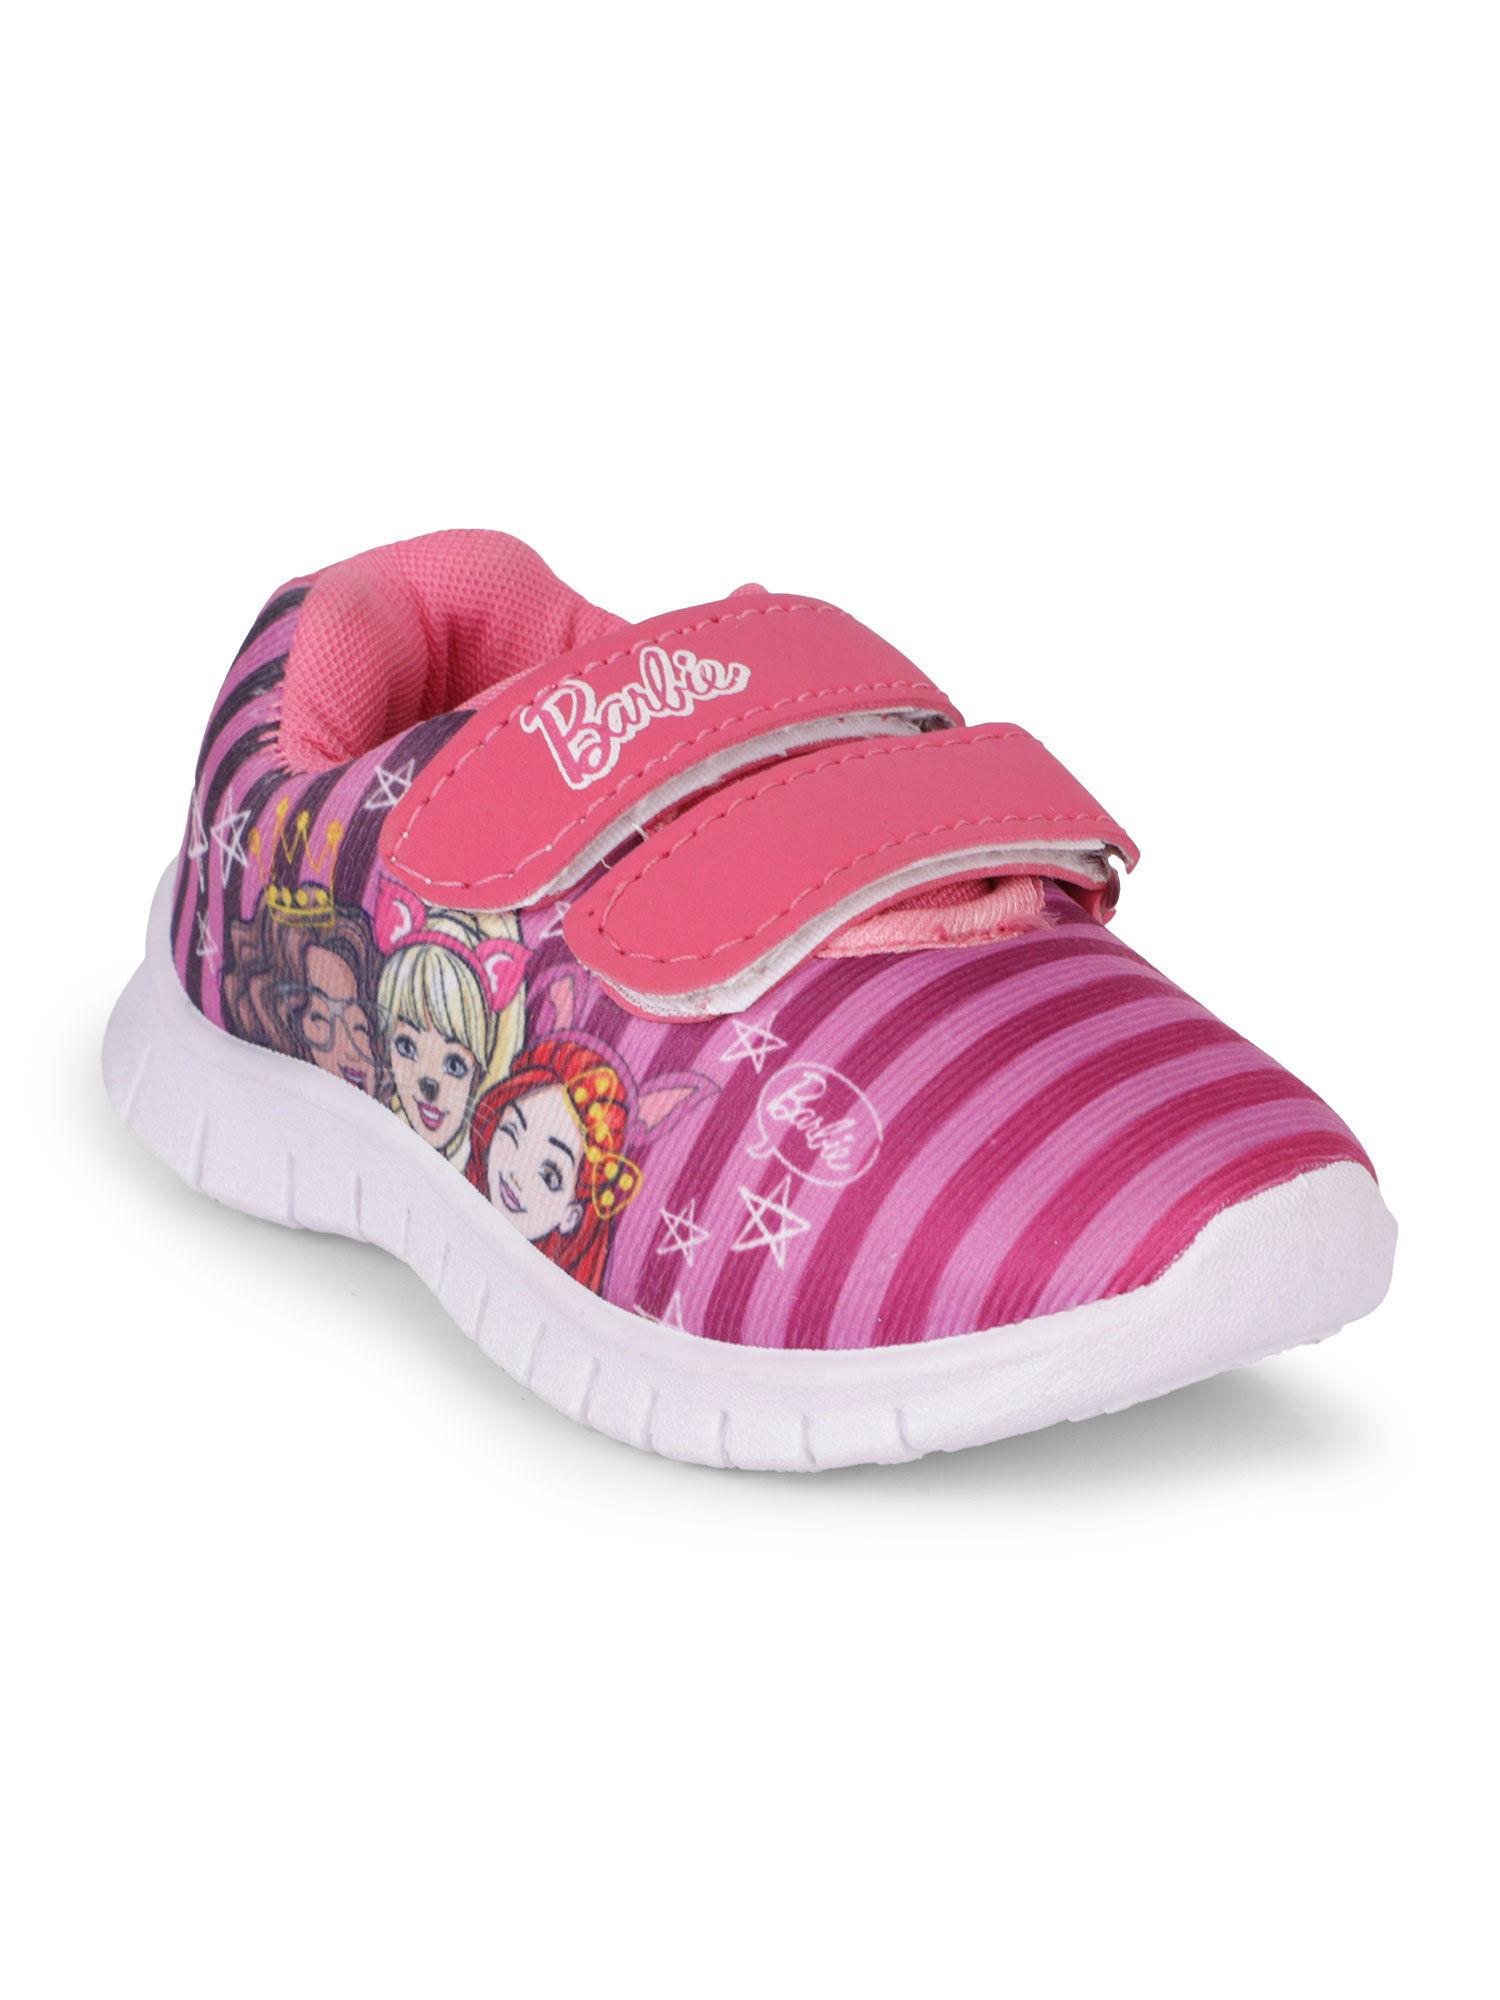 pink color barbie printed shoes for girls